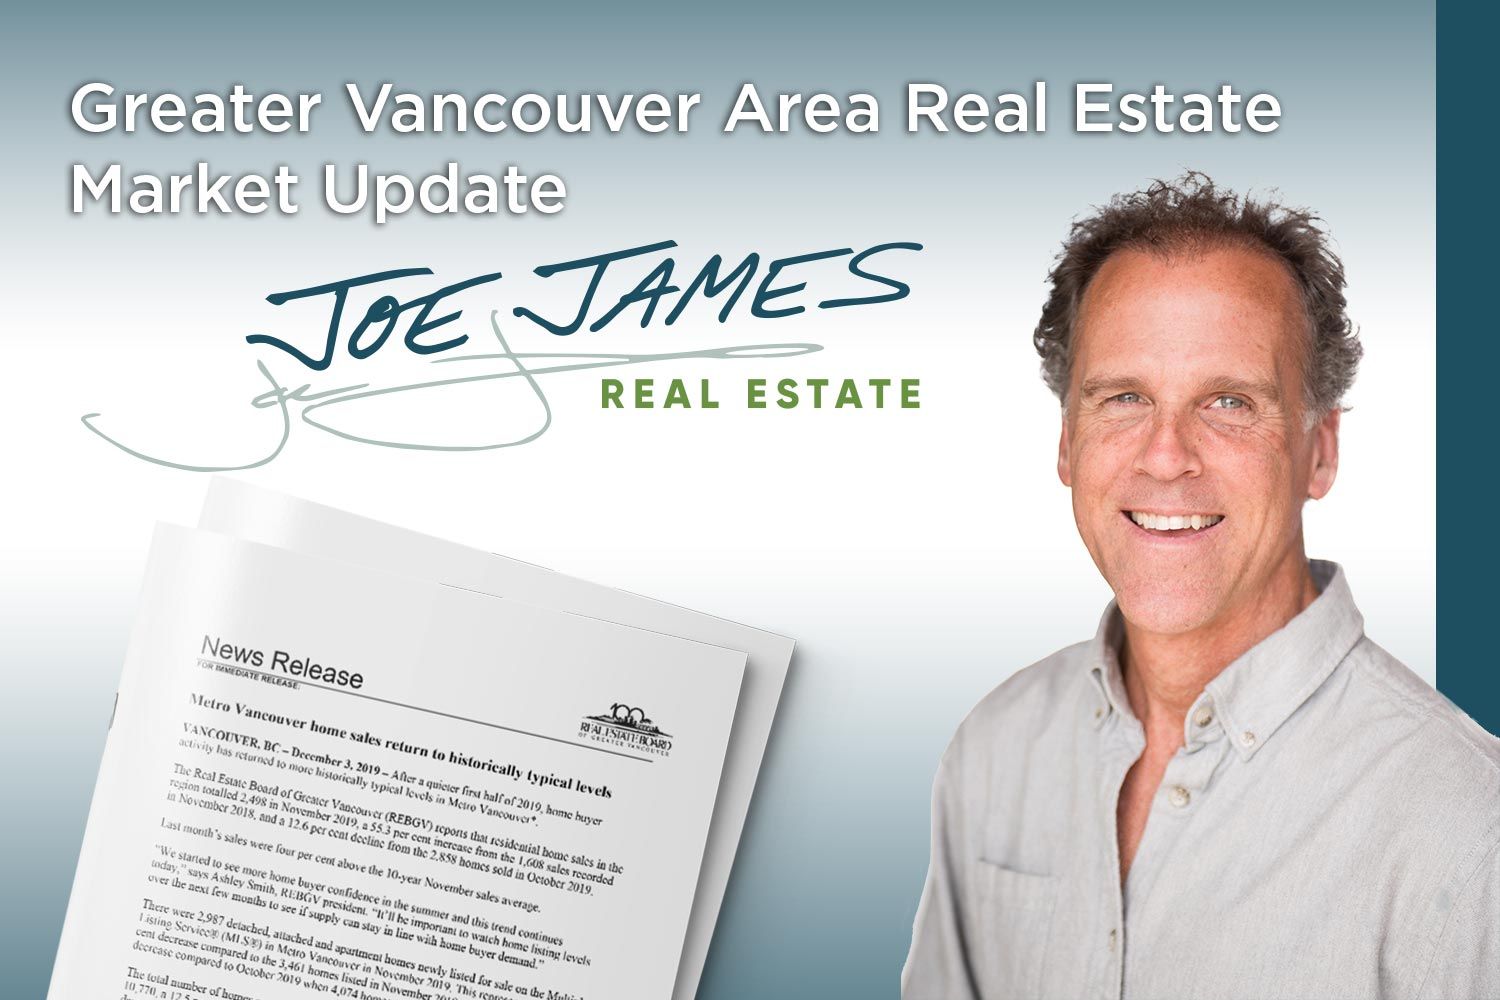 Metro Vancouver home sales return to historically typical levels